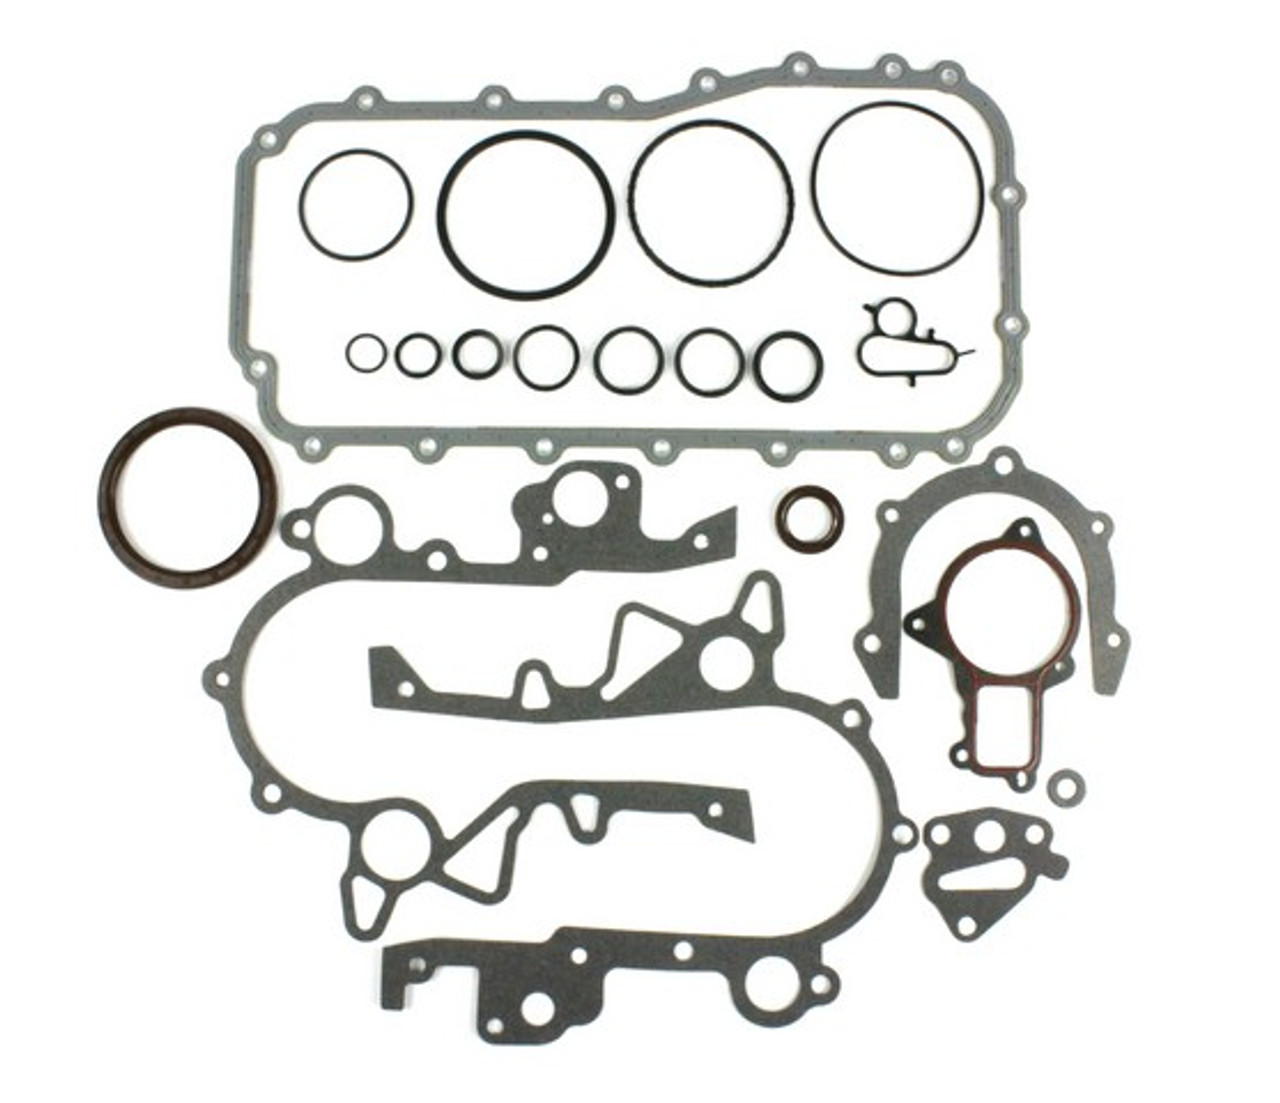 Lower Gasket Set 3.8L 2004 Chrysler Town & Country - LGS1135.56